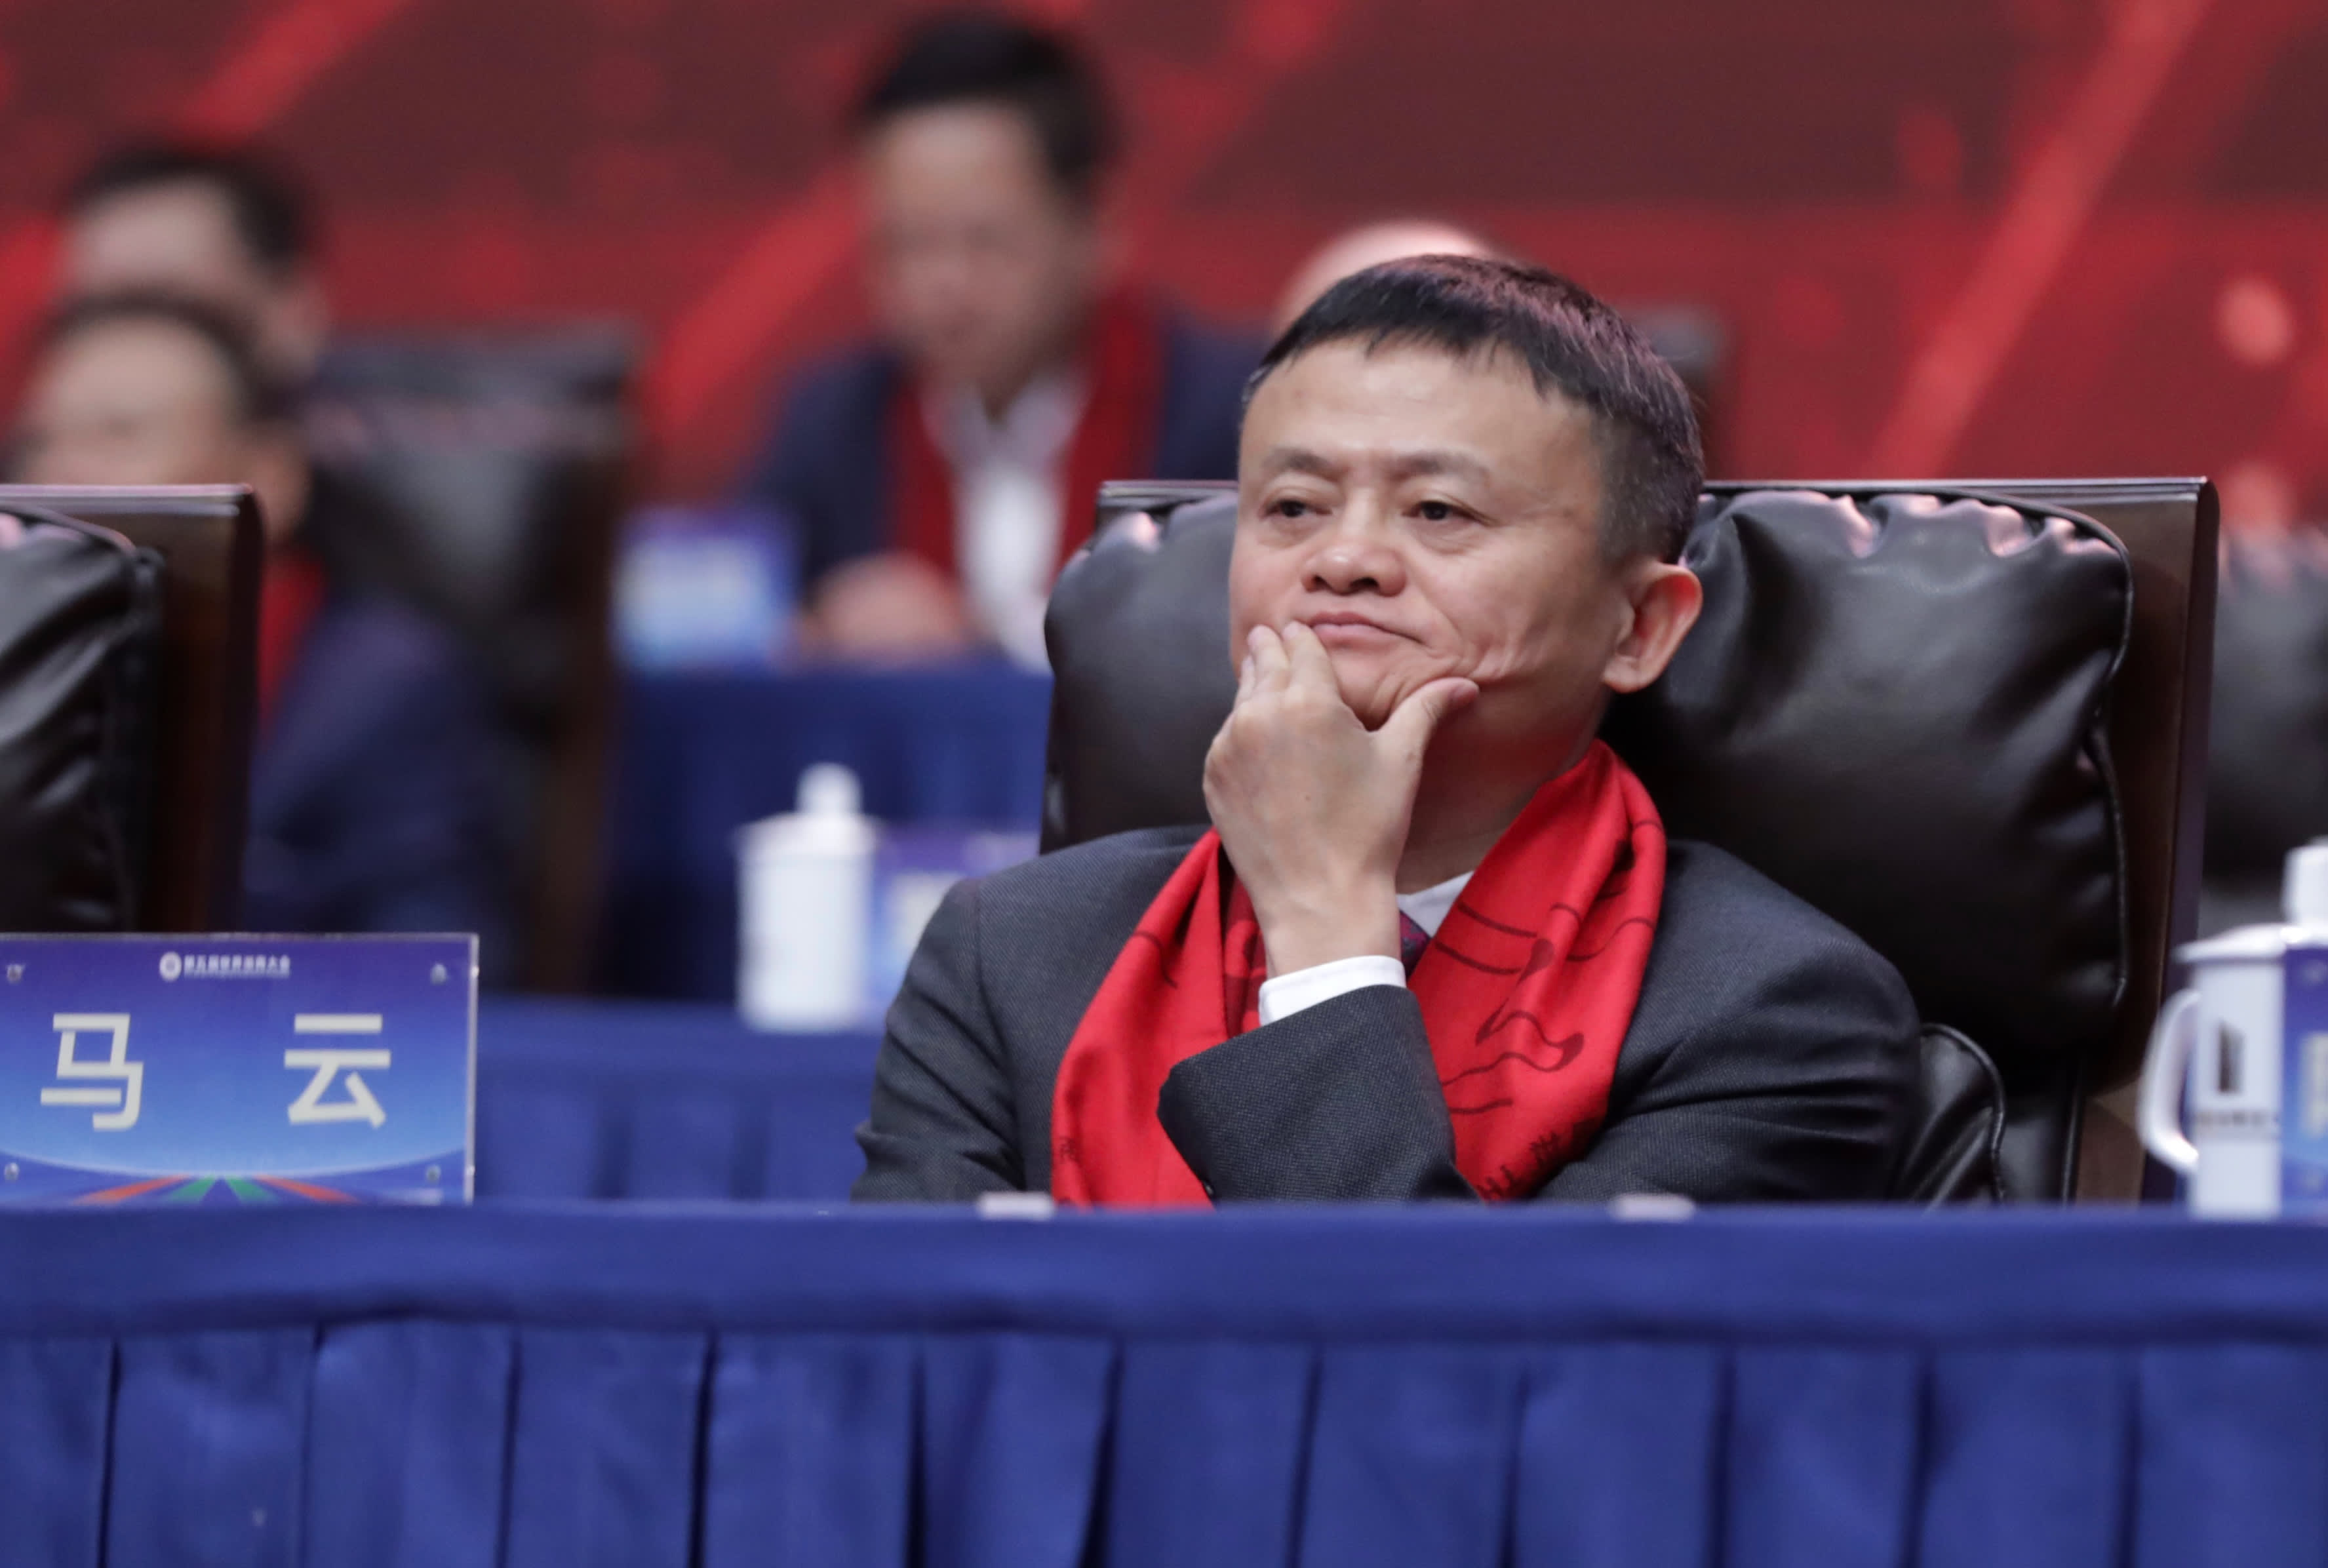 Jack Ma’s tension with Beijing casts a shadow over Alibaba’s future